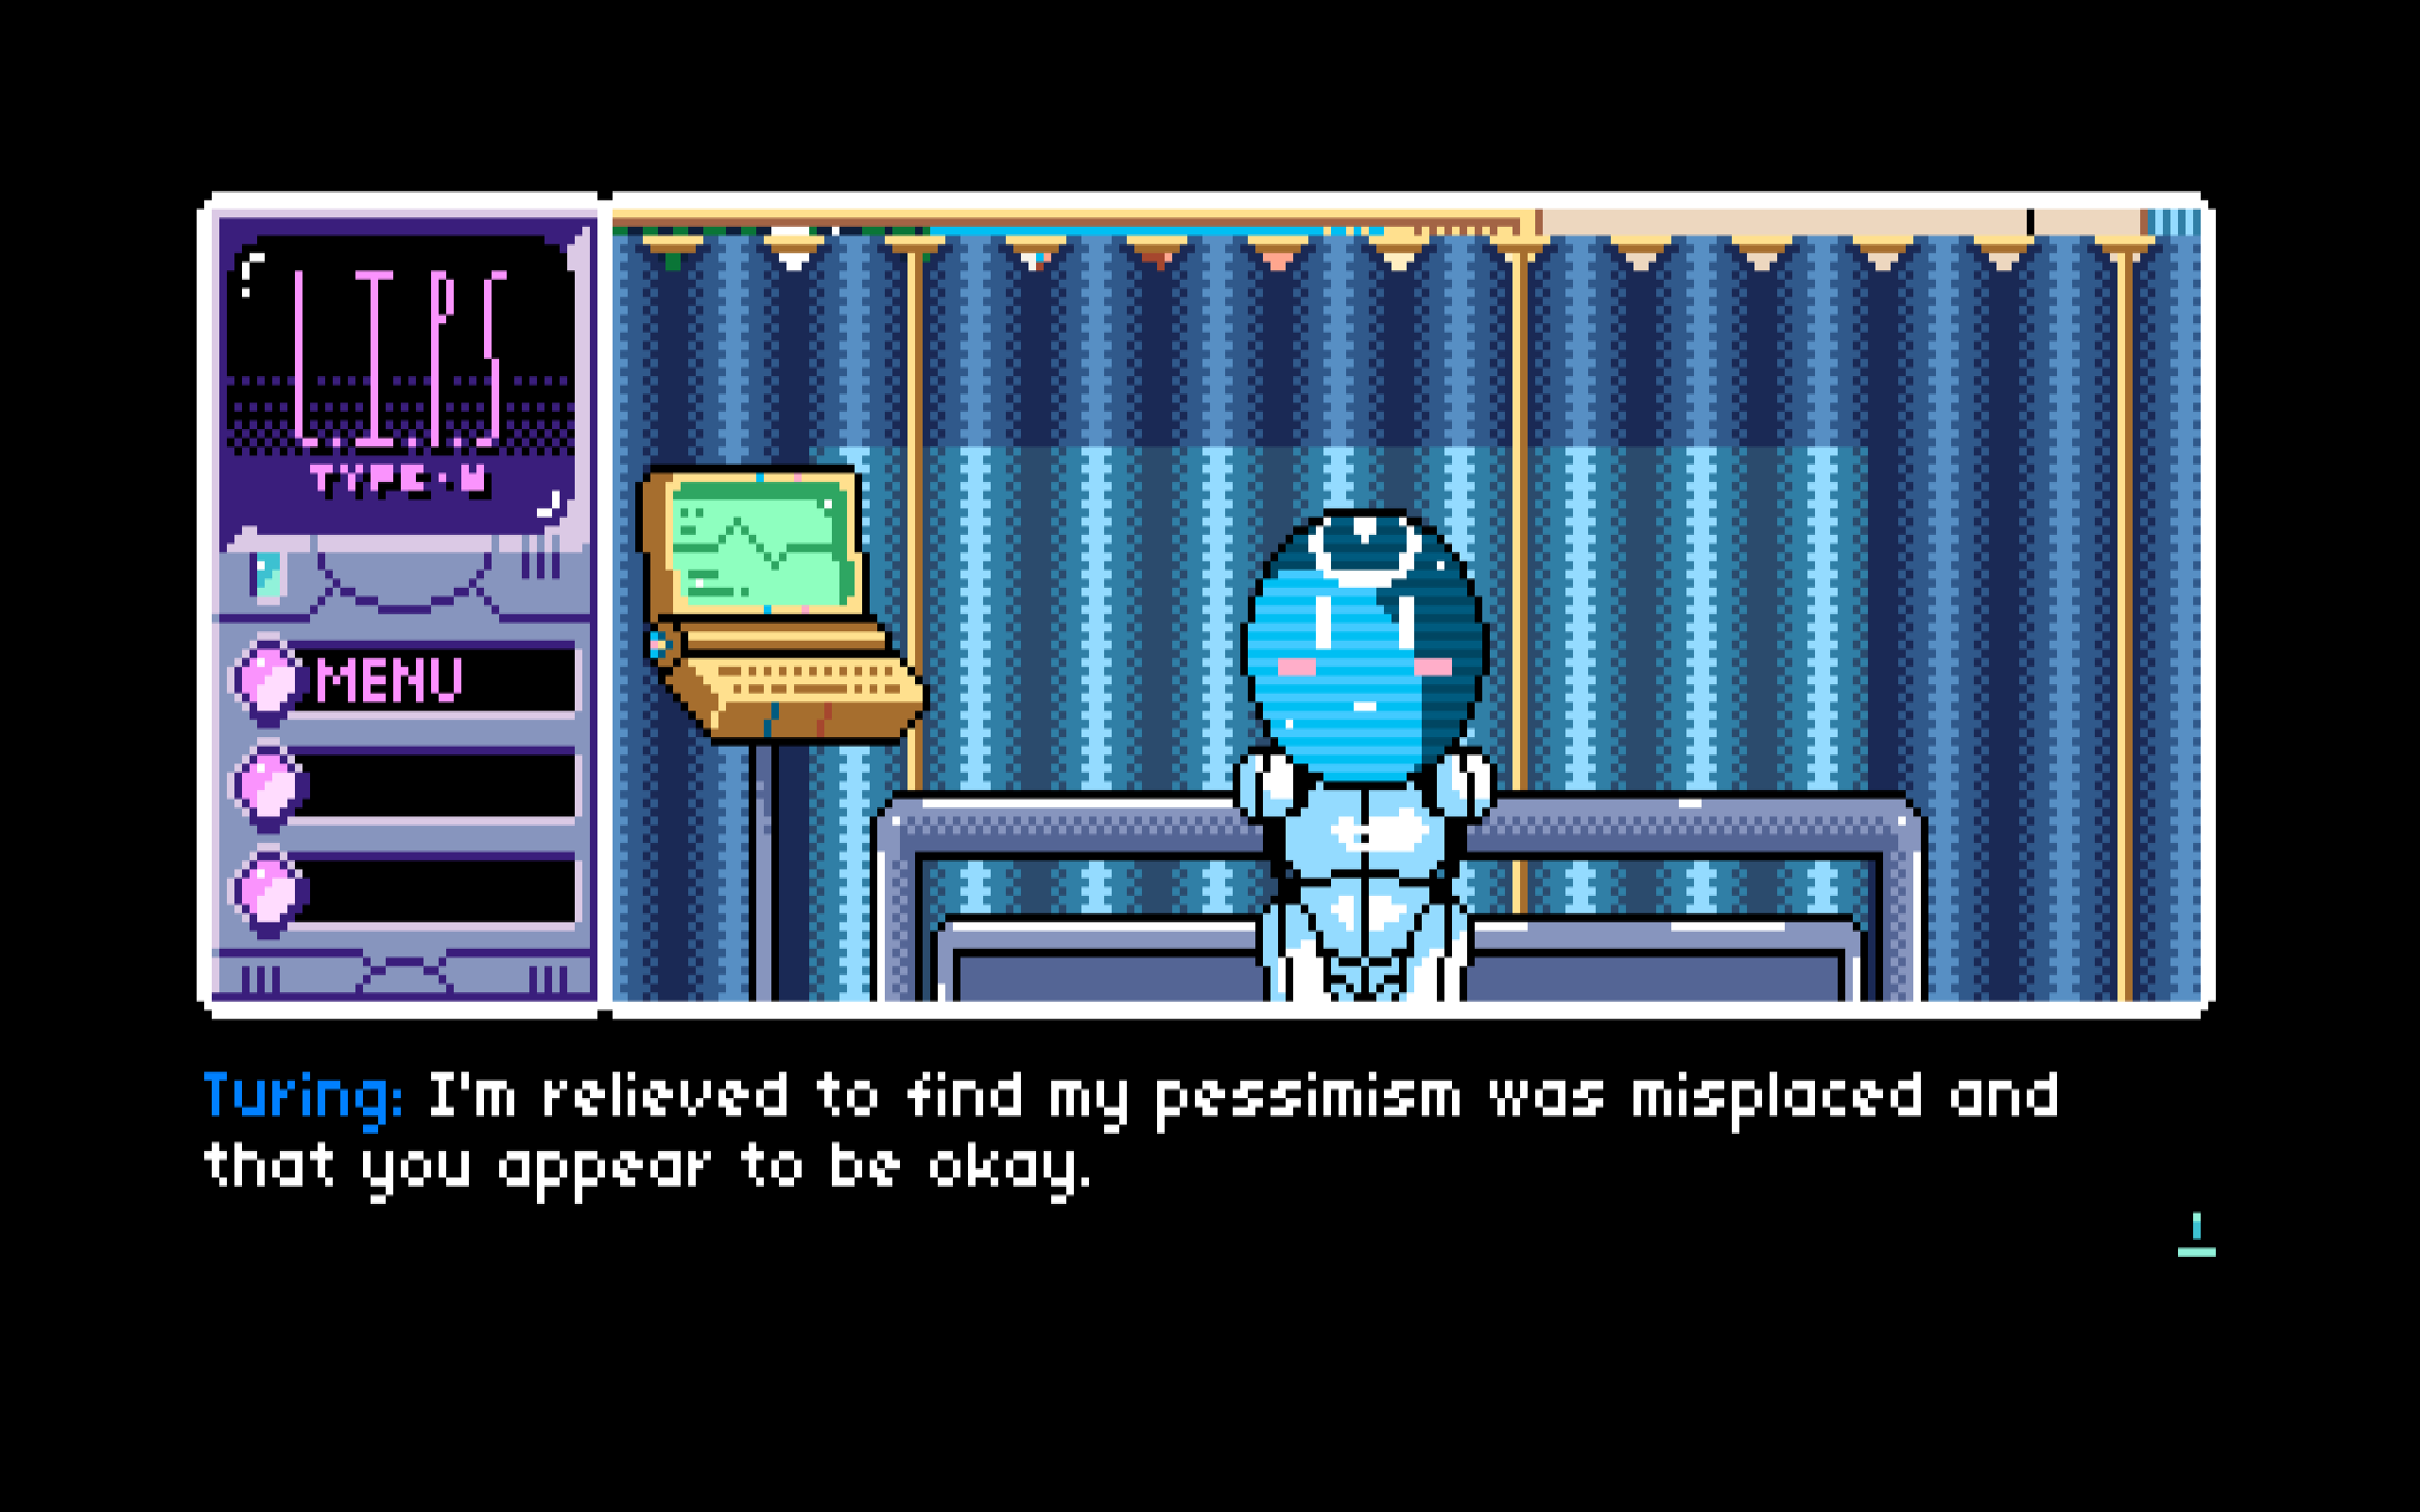 Read Only Memories #3